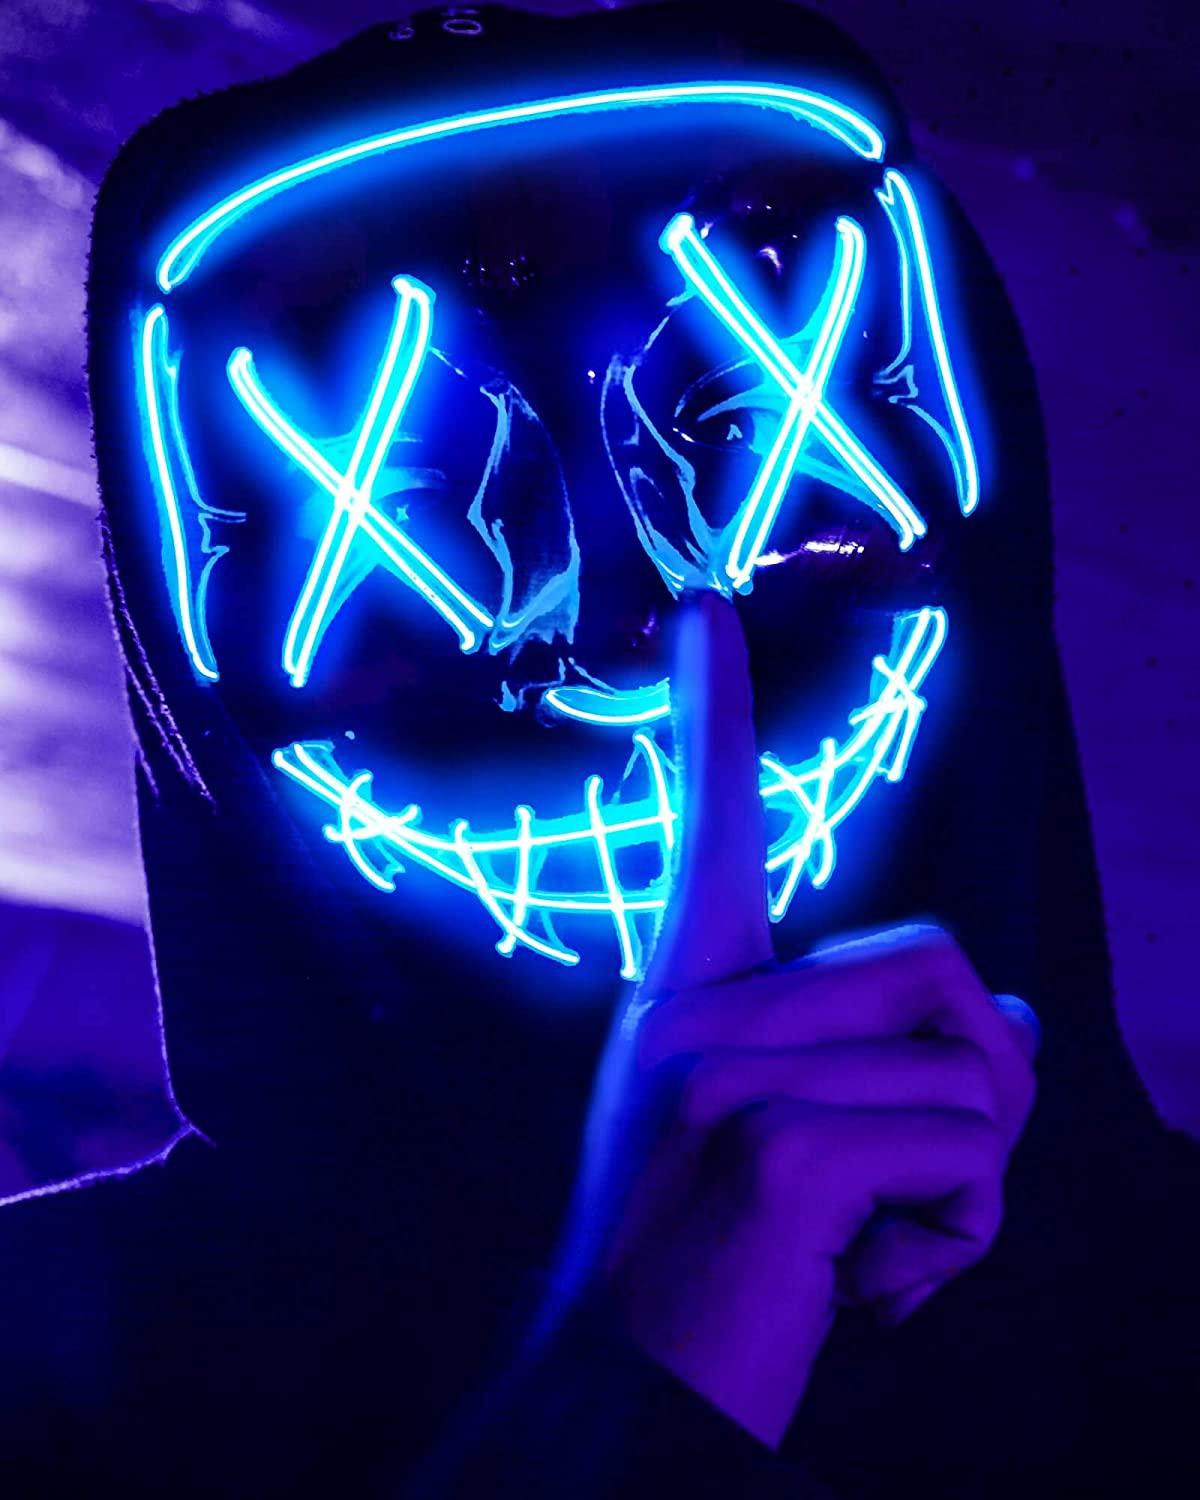 Scary Halloween Disguise, LED Light up DisguiseMask Cosplay, Glowing in The Dark Disguise Costume - If you say i do